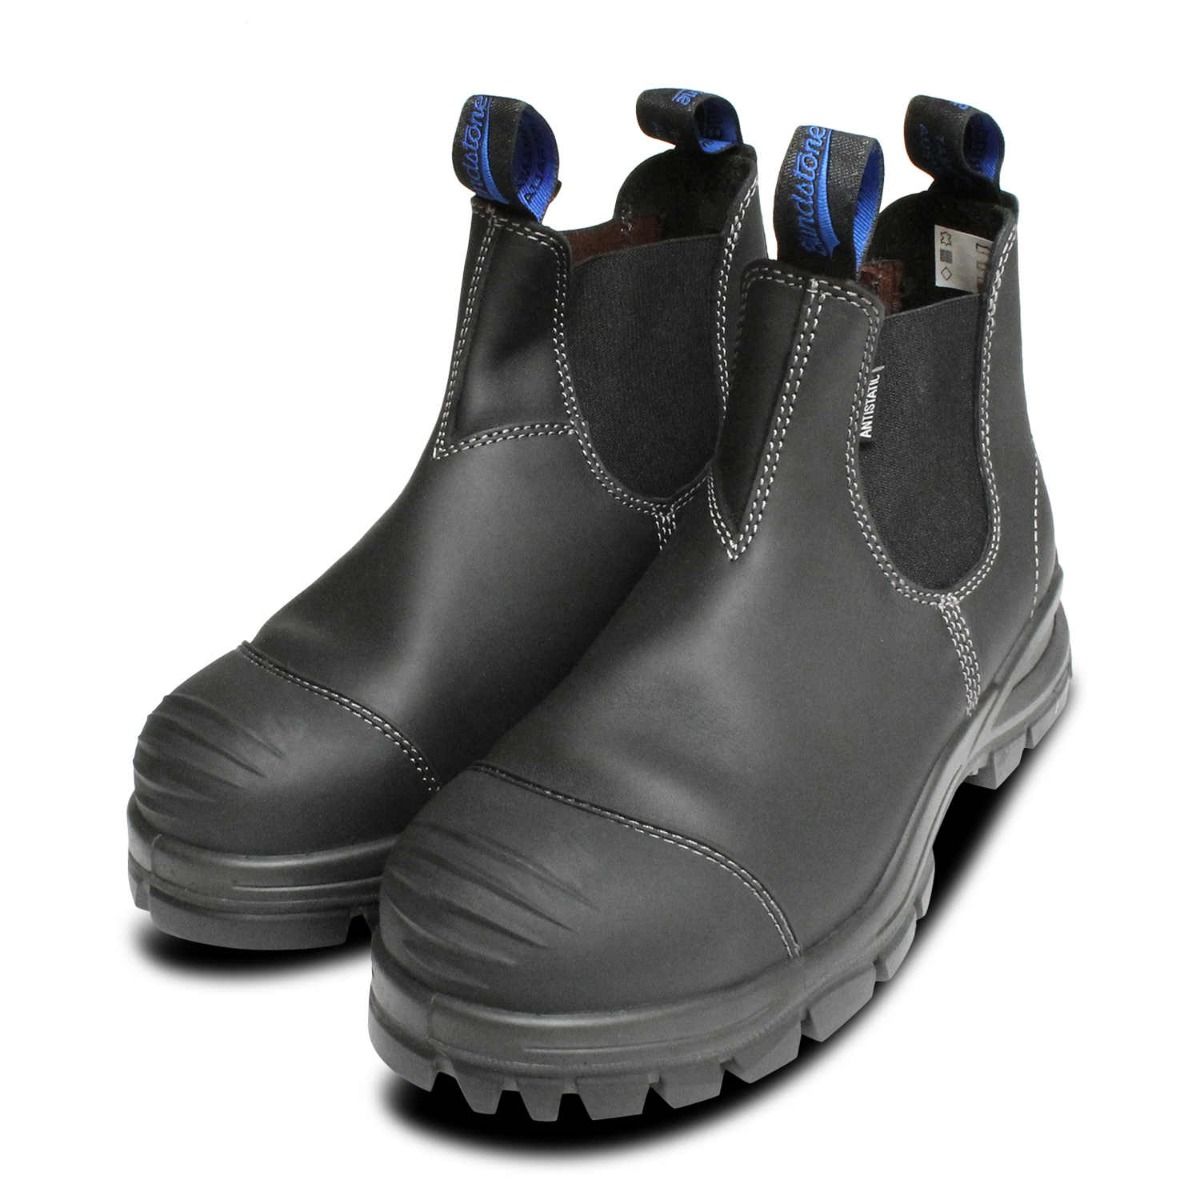 blundstone safety shoes